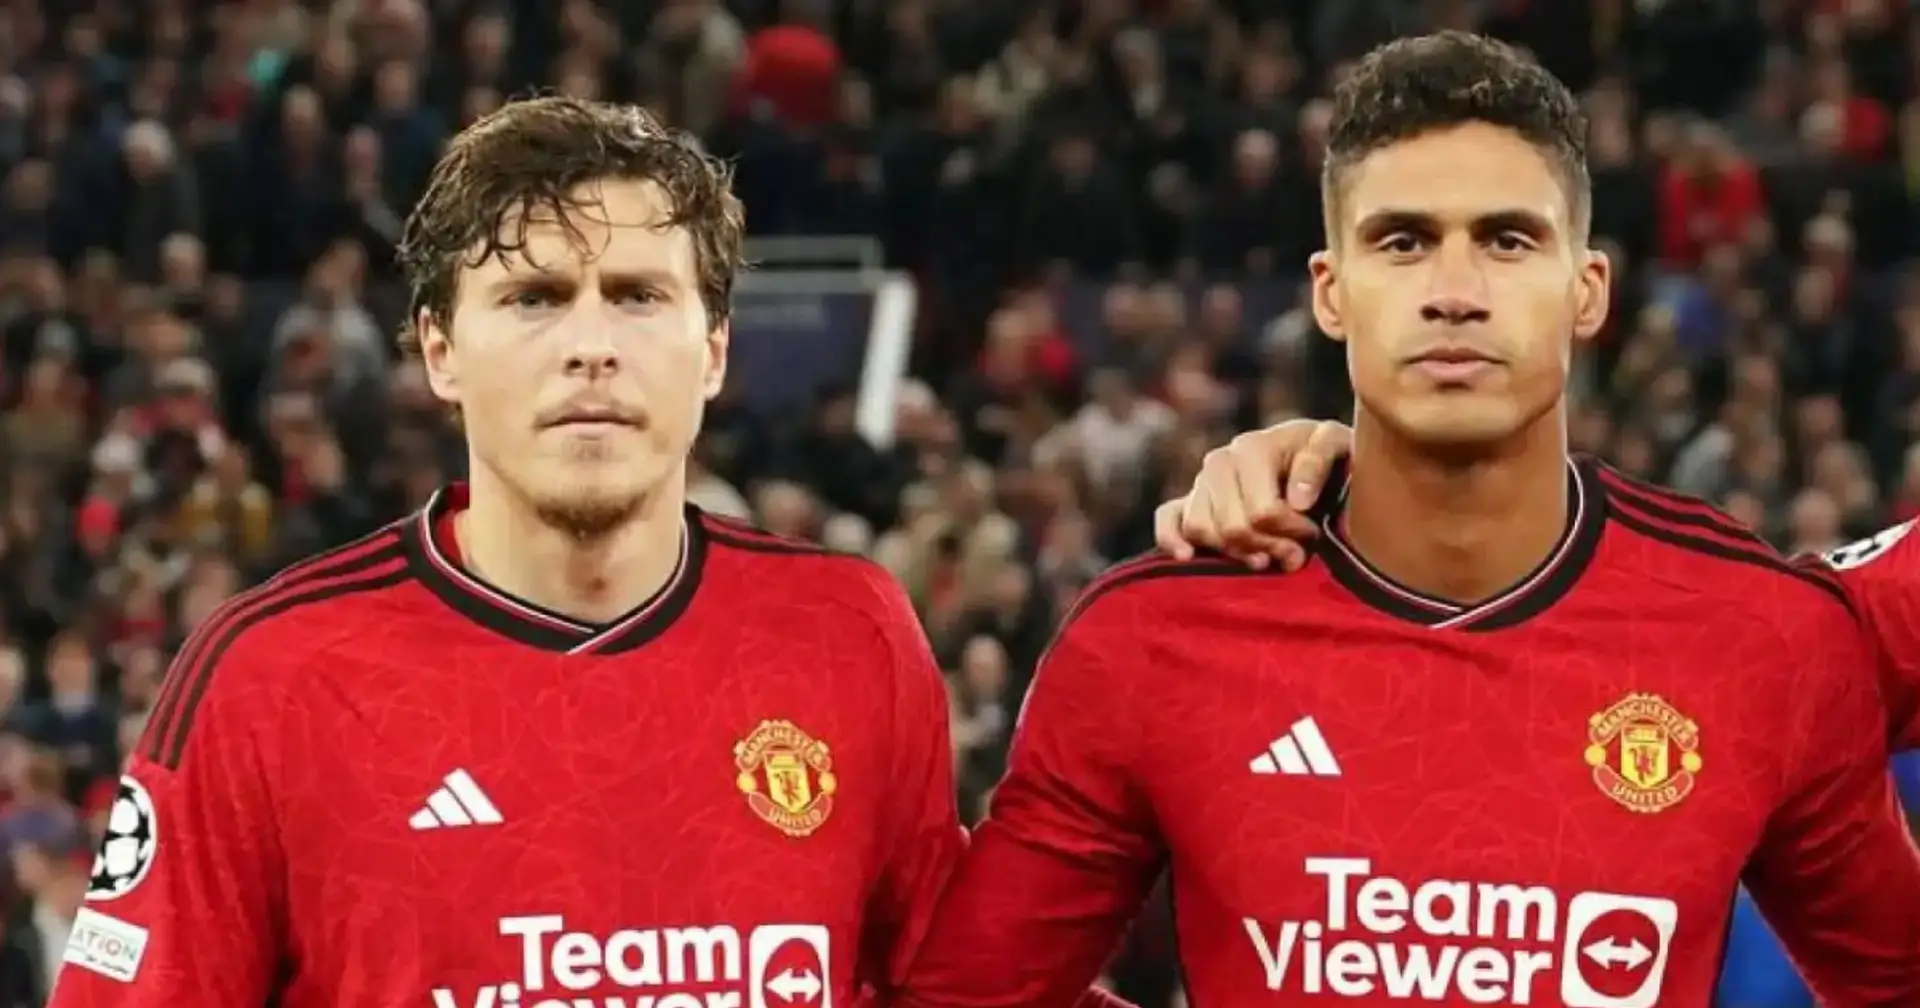 Two Man United defender put up for sale — Harry Maguire is not one of them (reliability: 5 stars)